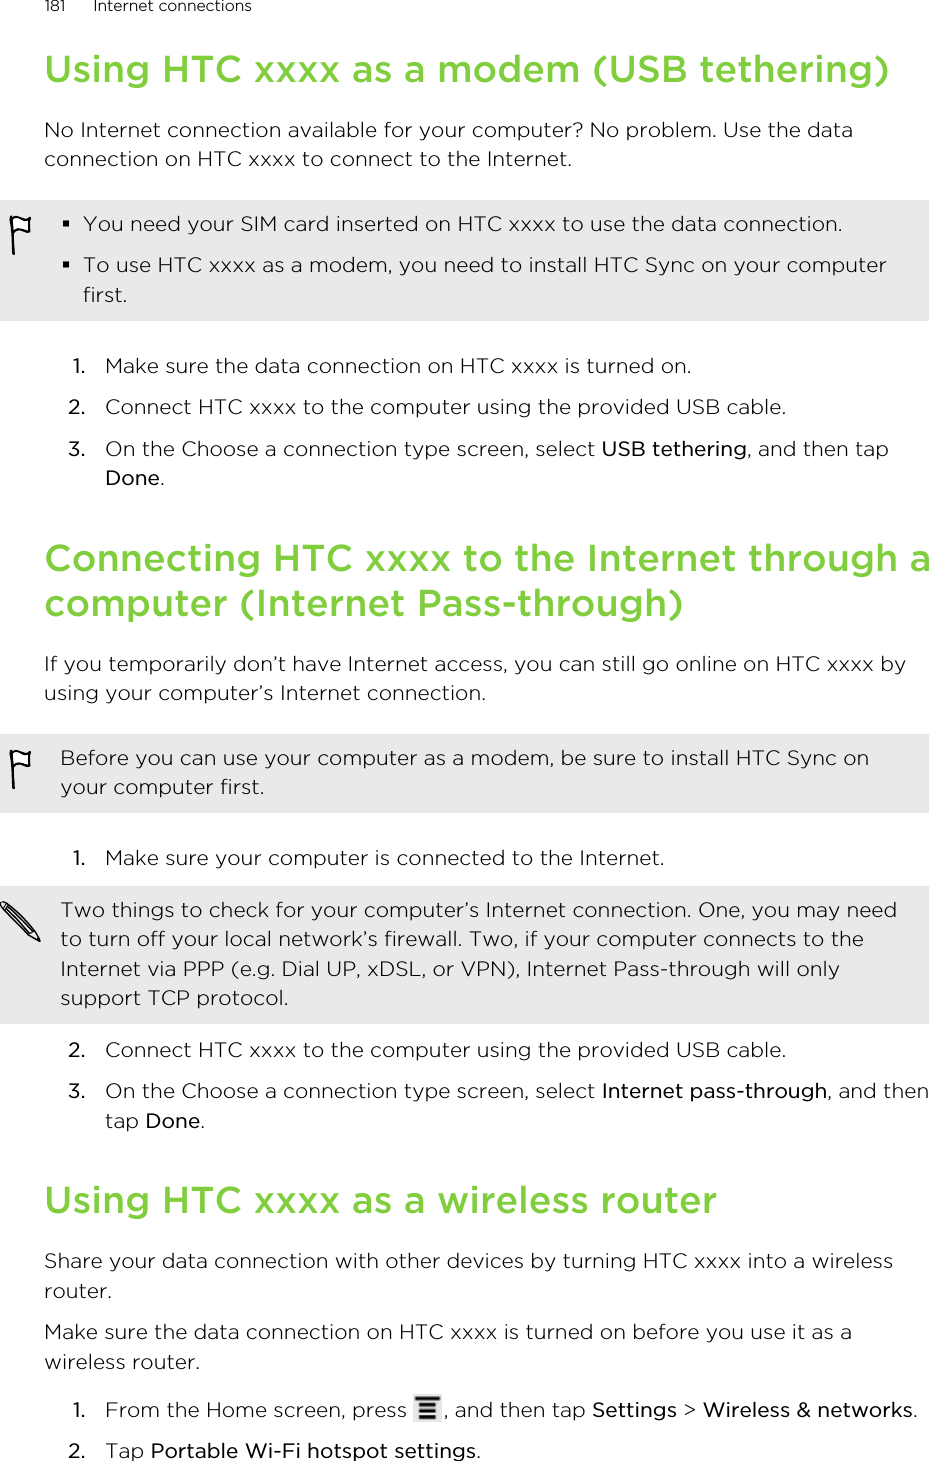 Using HTC xxxx as a modem (USB tethering)No Internet connection available for your computer? No problem. Use the dataconnection on HTC xxxx to connect to the Internet.§You need your SIM card inserted on HTC xxxx to use the data connection.§To use HTC xxxx as a modem, you need to install HTC Sync on your computerfirst.1. Make sure the data connection on HTC xxxx is turned on.2. Connect HTC xxxx to the computer using the provided USB cable.3. On the Choose a connection type screen, select USB tethering, and then tapDone.Connecting HTC xxxx to the Internet through acomputer (Internet Pass-through)If you temporarily don’t have Internet access, you can still go online on HTC xxxx byusing your computer’s Internet connection.Before you can use your computer as a modem, be sure to install HTC Sync onyour computer first.1. Make sure your computer is connected to the Internet. Two things to check for your computer’s Internet connection. One, you may needto turn off your local network’s firewall. Two, if your computer connects to theInternet via PPP (e.g. Dial UP, xDSL, or VPN), Internet Pass-through will onlysupport TCP protocol.2. Connect HTC xxxx to the computer using the provided USB cable.3. On the Choose a connection type screen, select Internet pass-through, and thentap Done.Using HTC xxxx as a wireless routerShare your data connection with other devices by turning HTC xxxx into a wirelessrouter.Make sure the data connection on HTC xxxx is turned on before you use it as awireless router.1. From the Home screen, press  , and then tap Settings &gt; Wireless &amp; networks.2. Tap Portable Wi-Fi hotspot settings.181 Internet connections